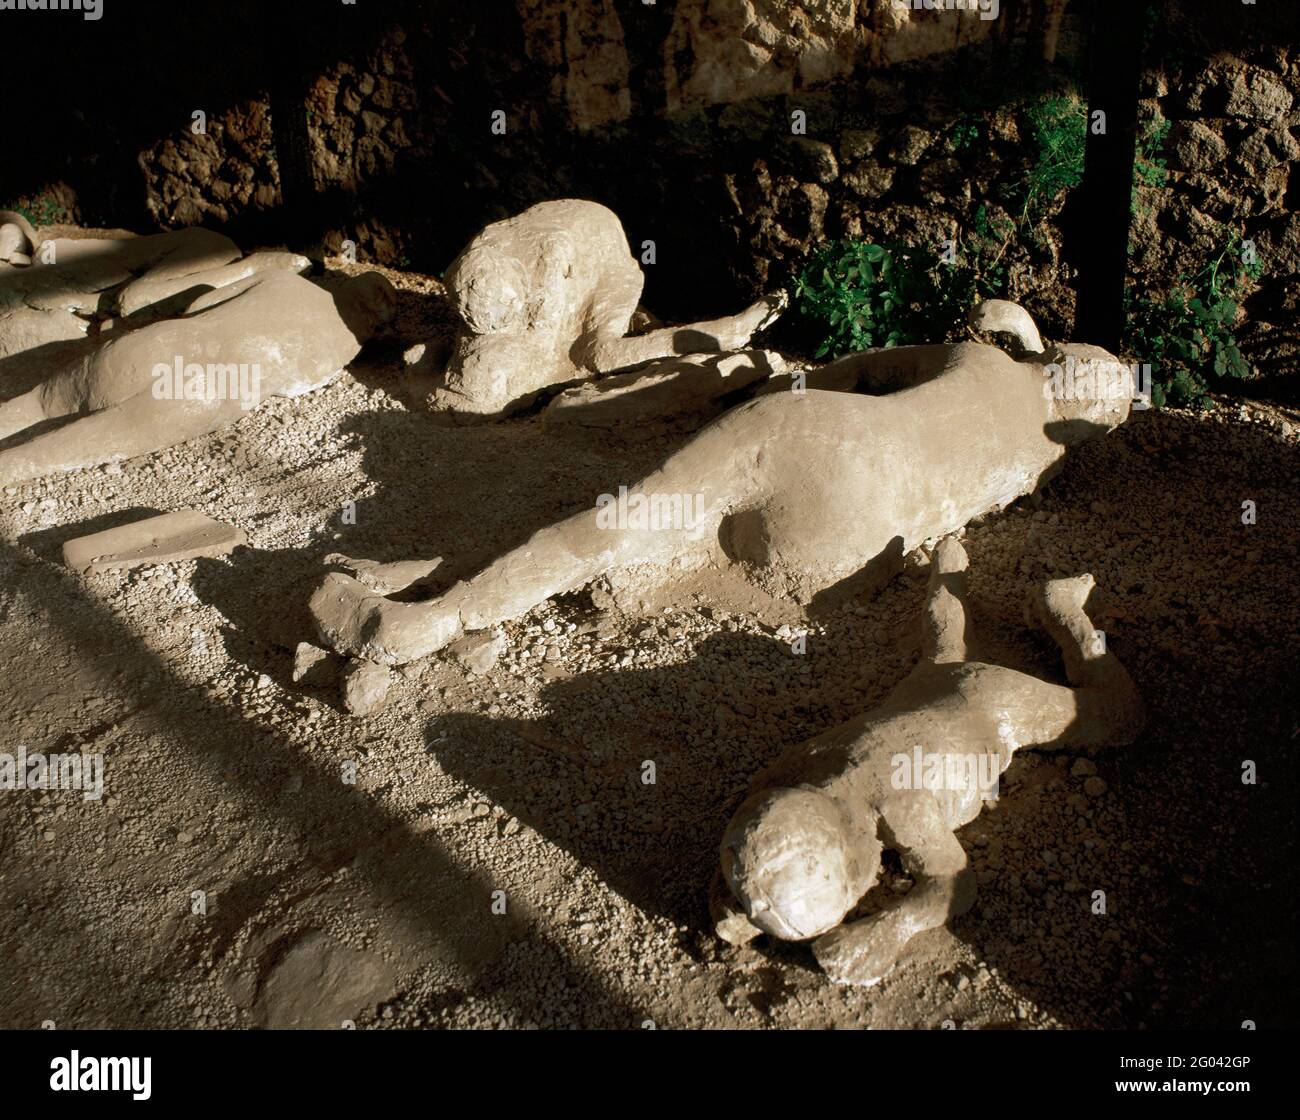 Pompeii. Fossilised corpses found in the Garden of the Fugitives. This group of Pompeian citizens was trapped at the time of the eruption of Vesuvius (79 AD). These are casts obtained by pouring liquid plaster into the 'voids' left in the ground after the bodies disappeared. Campania, Italy. Stock Photo